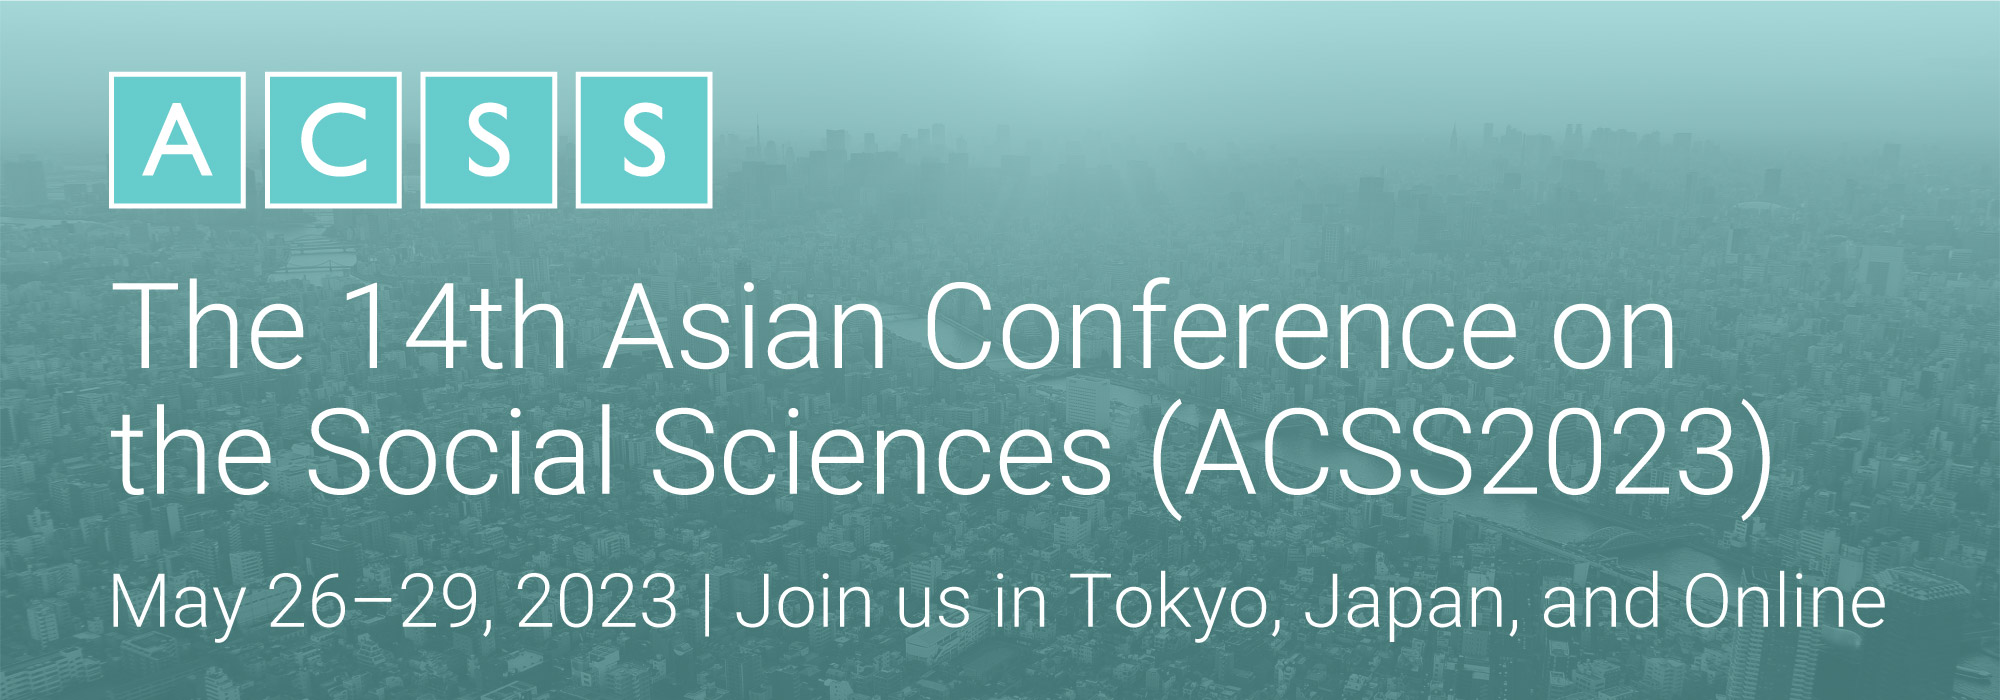 The 14th Asian Conference on the Social Sciences (ACSS2023) Logo